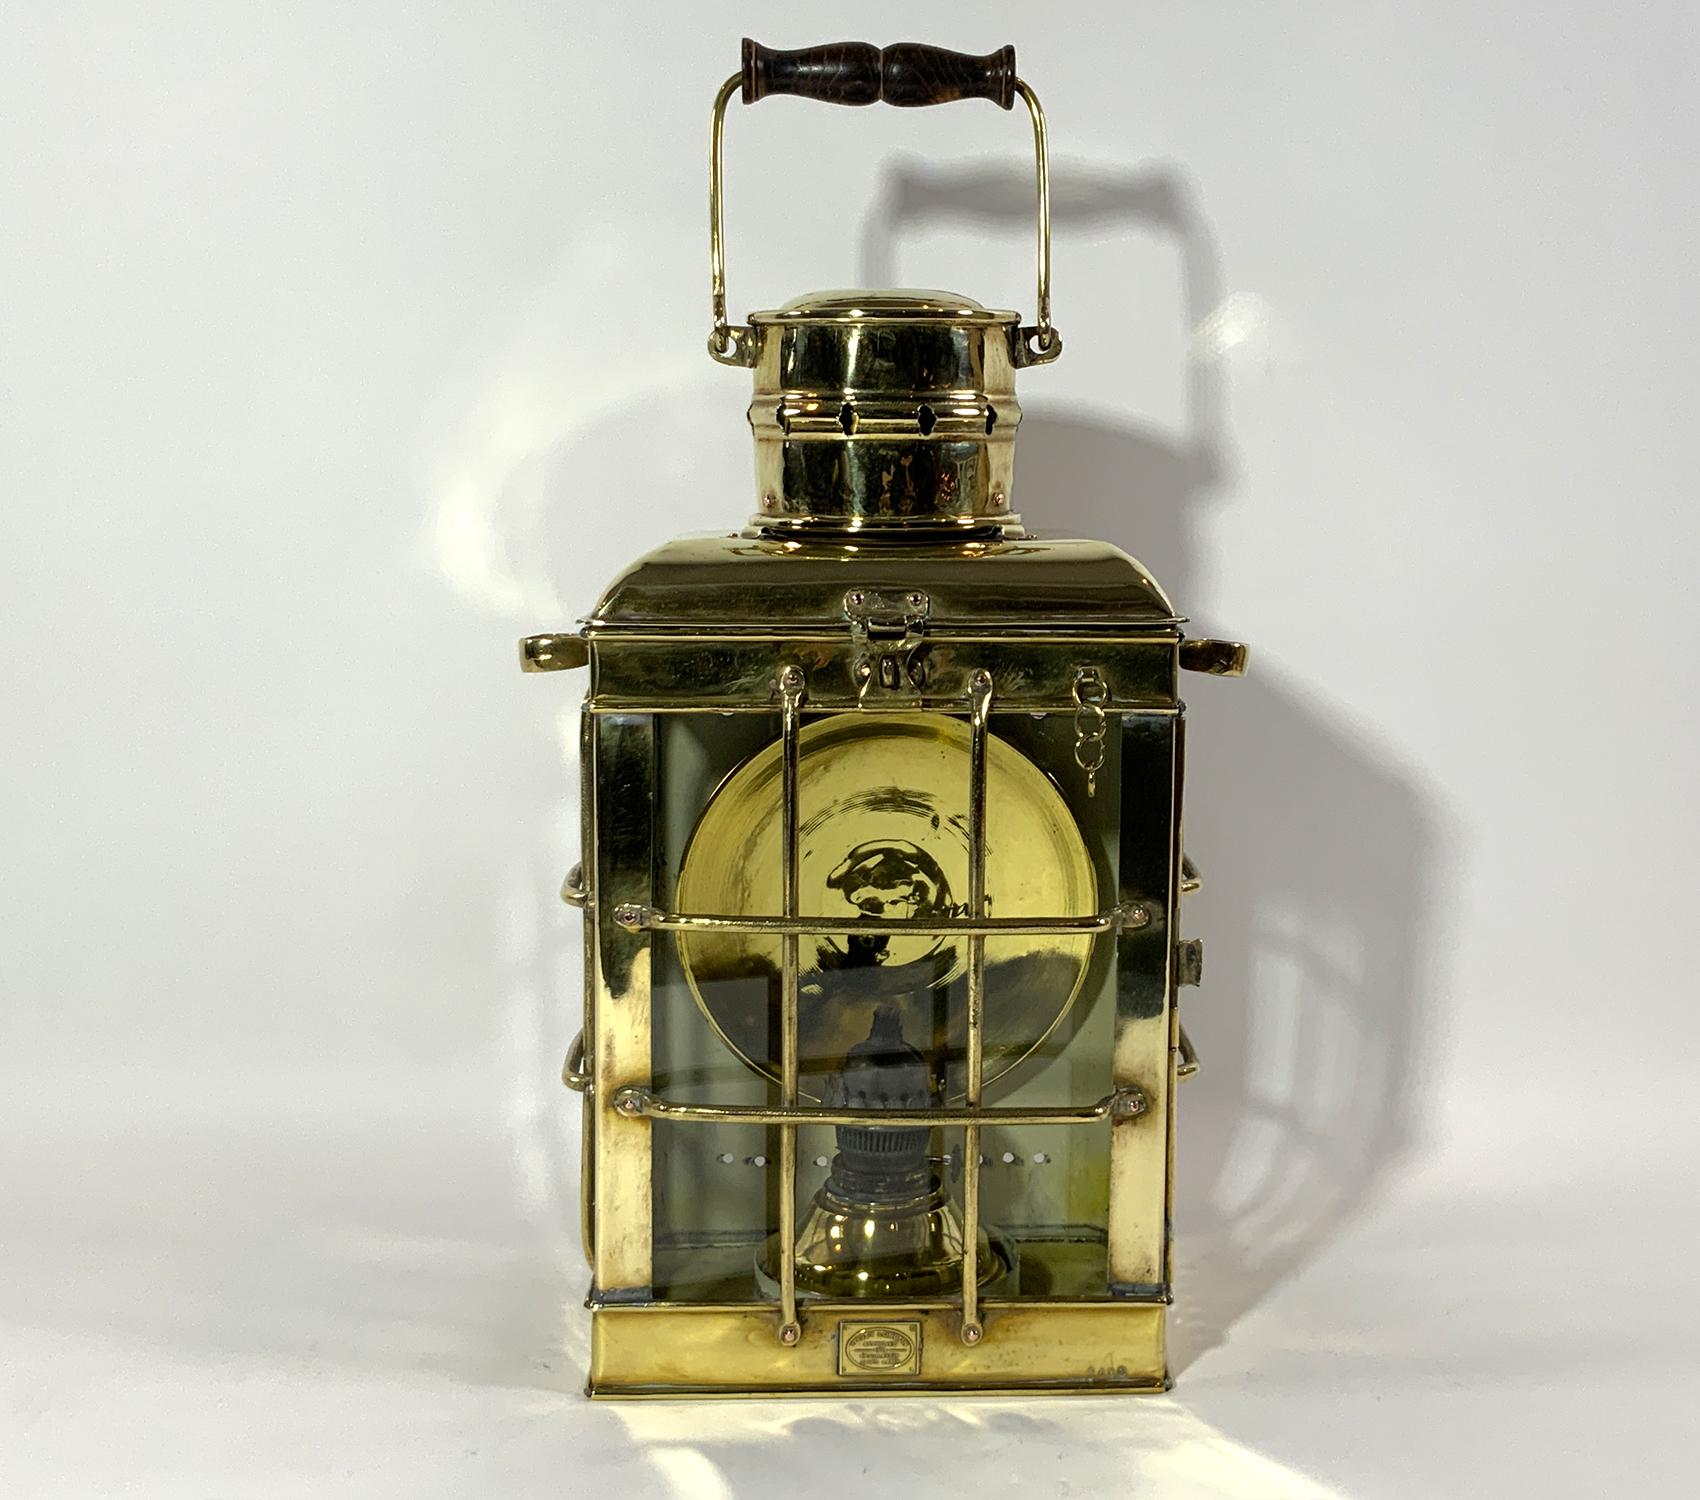 Solid brass ships lantern with makers badge from Davey of London. Approved 1924 Regulation marine lamp. There are three glass panels with protective brass grates. Vented chimney with hasp. Quite heavily built. Oil burner and rear reflector. Circa